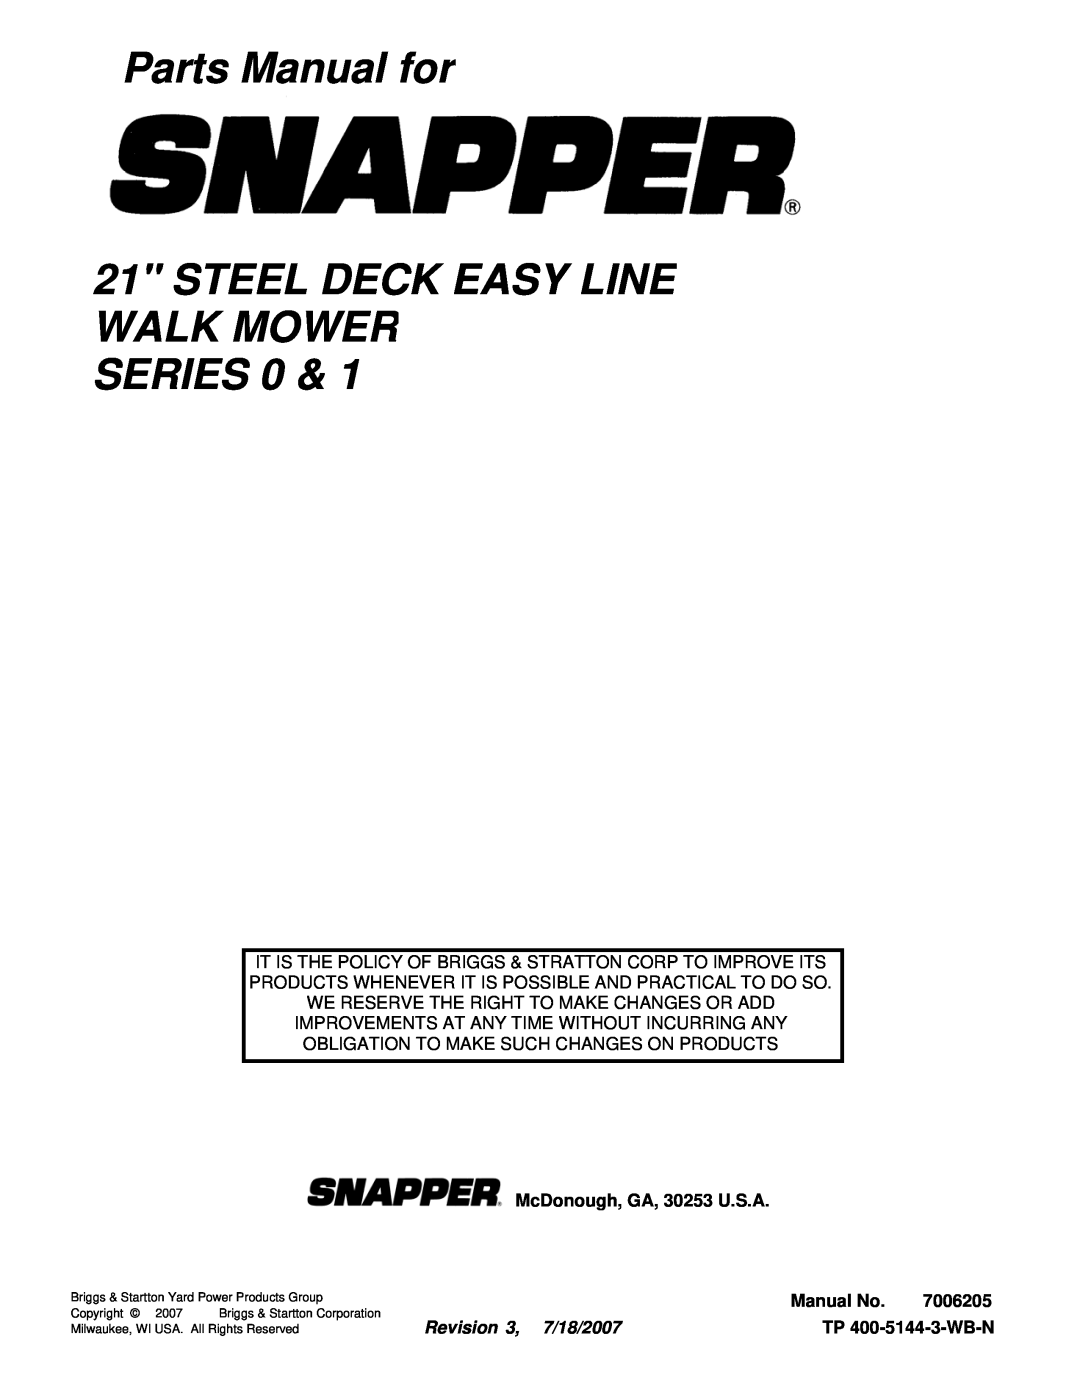 Briggs & Stratton SP211 (7800167), S21 Parts Manual for, Steel Deck Easy Line Walk Mower Series, Revision 3, 7/18/2007 